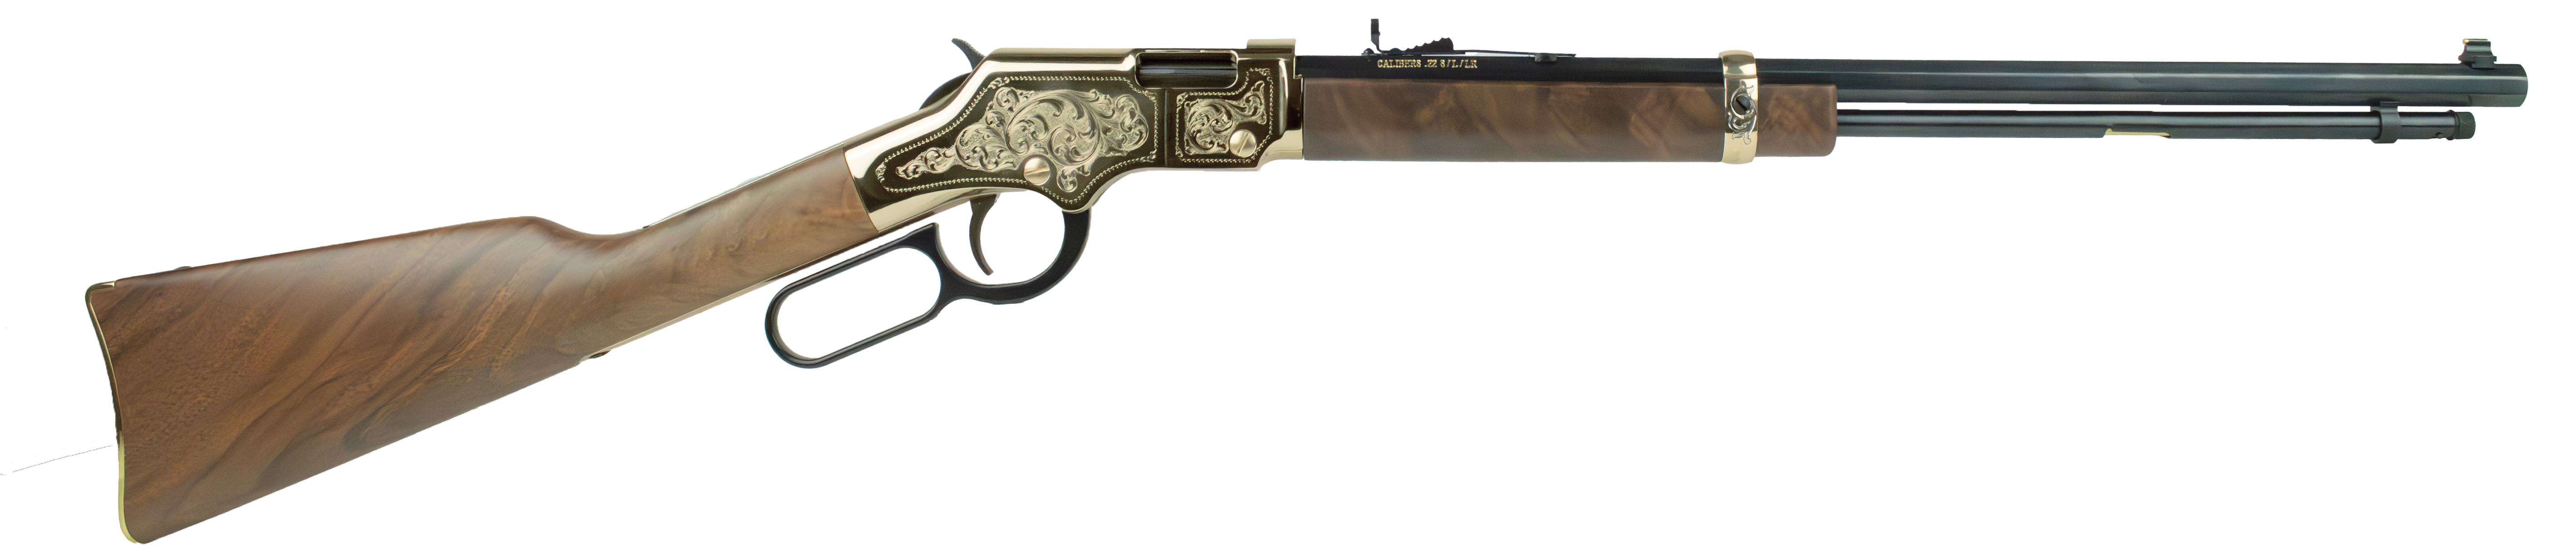 HENRY GOLDEN BOY DELUXE 22LR 4TH EDITION ENGRV